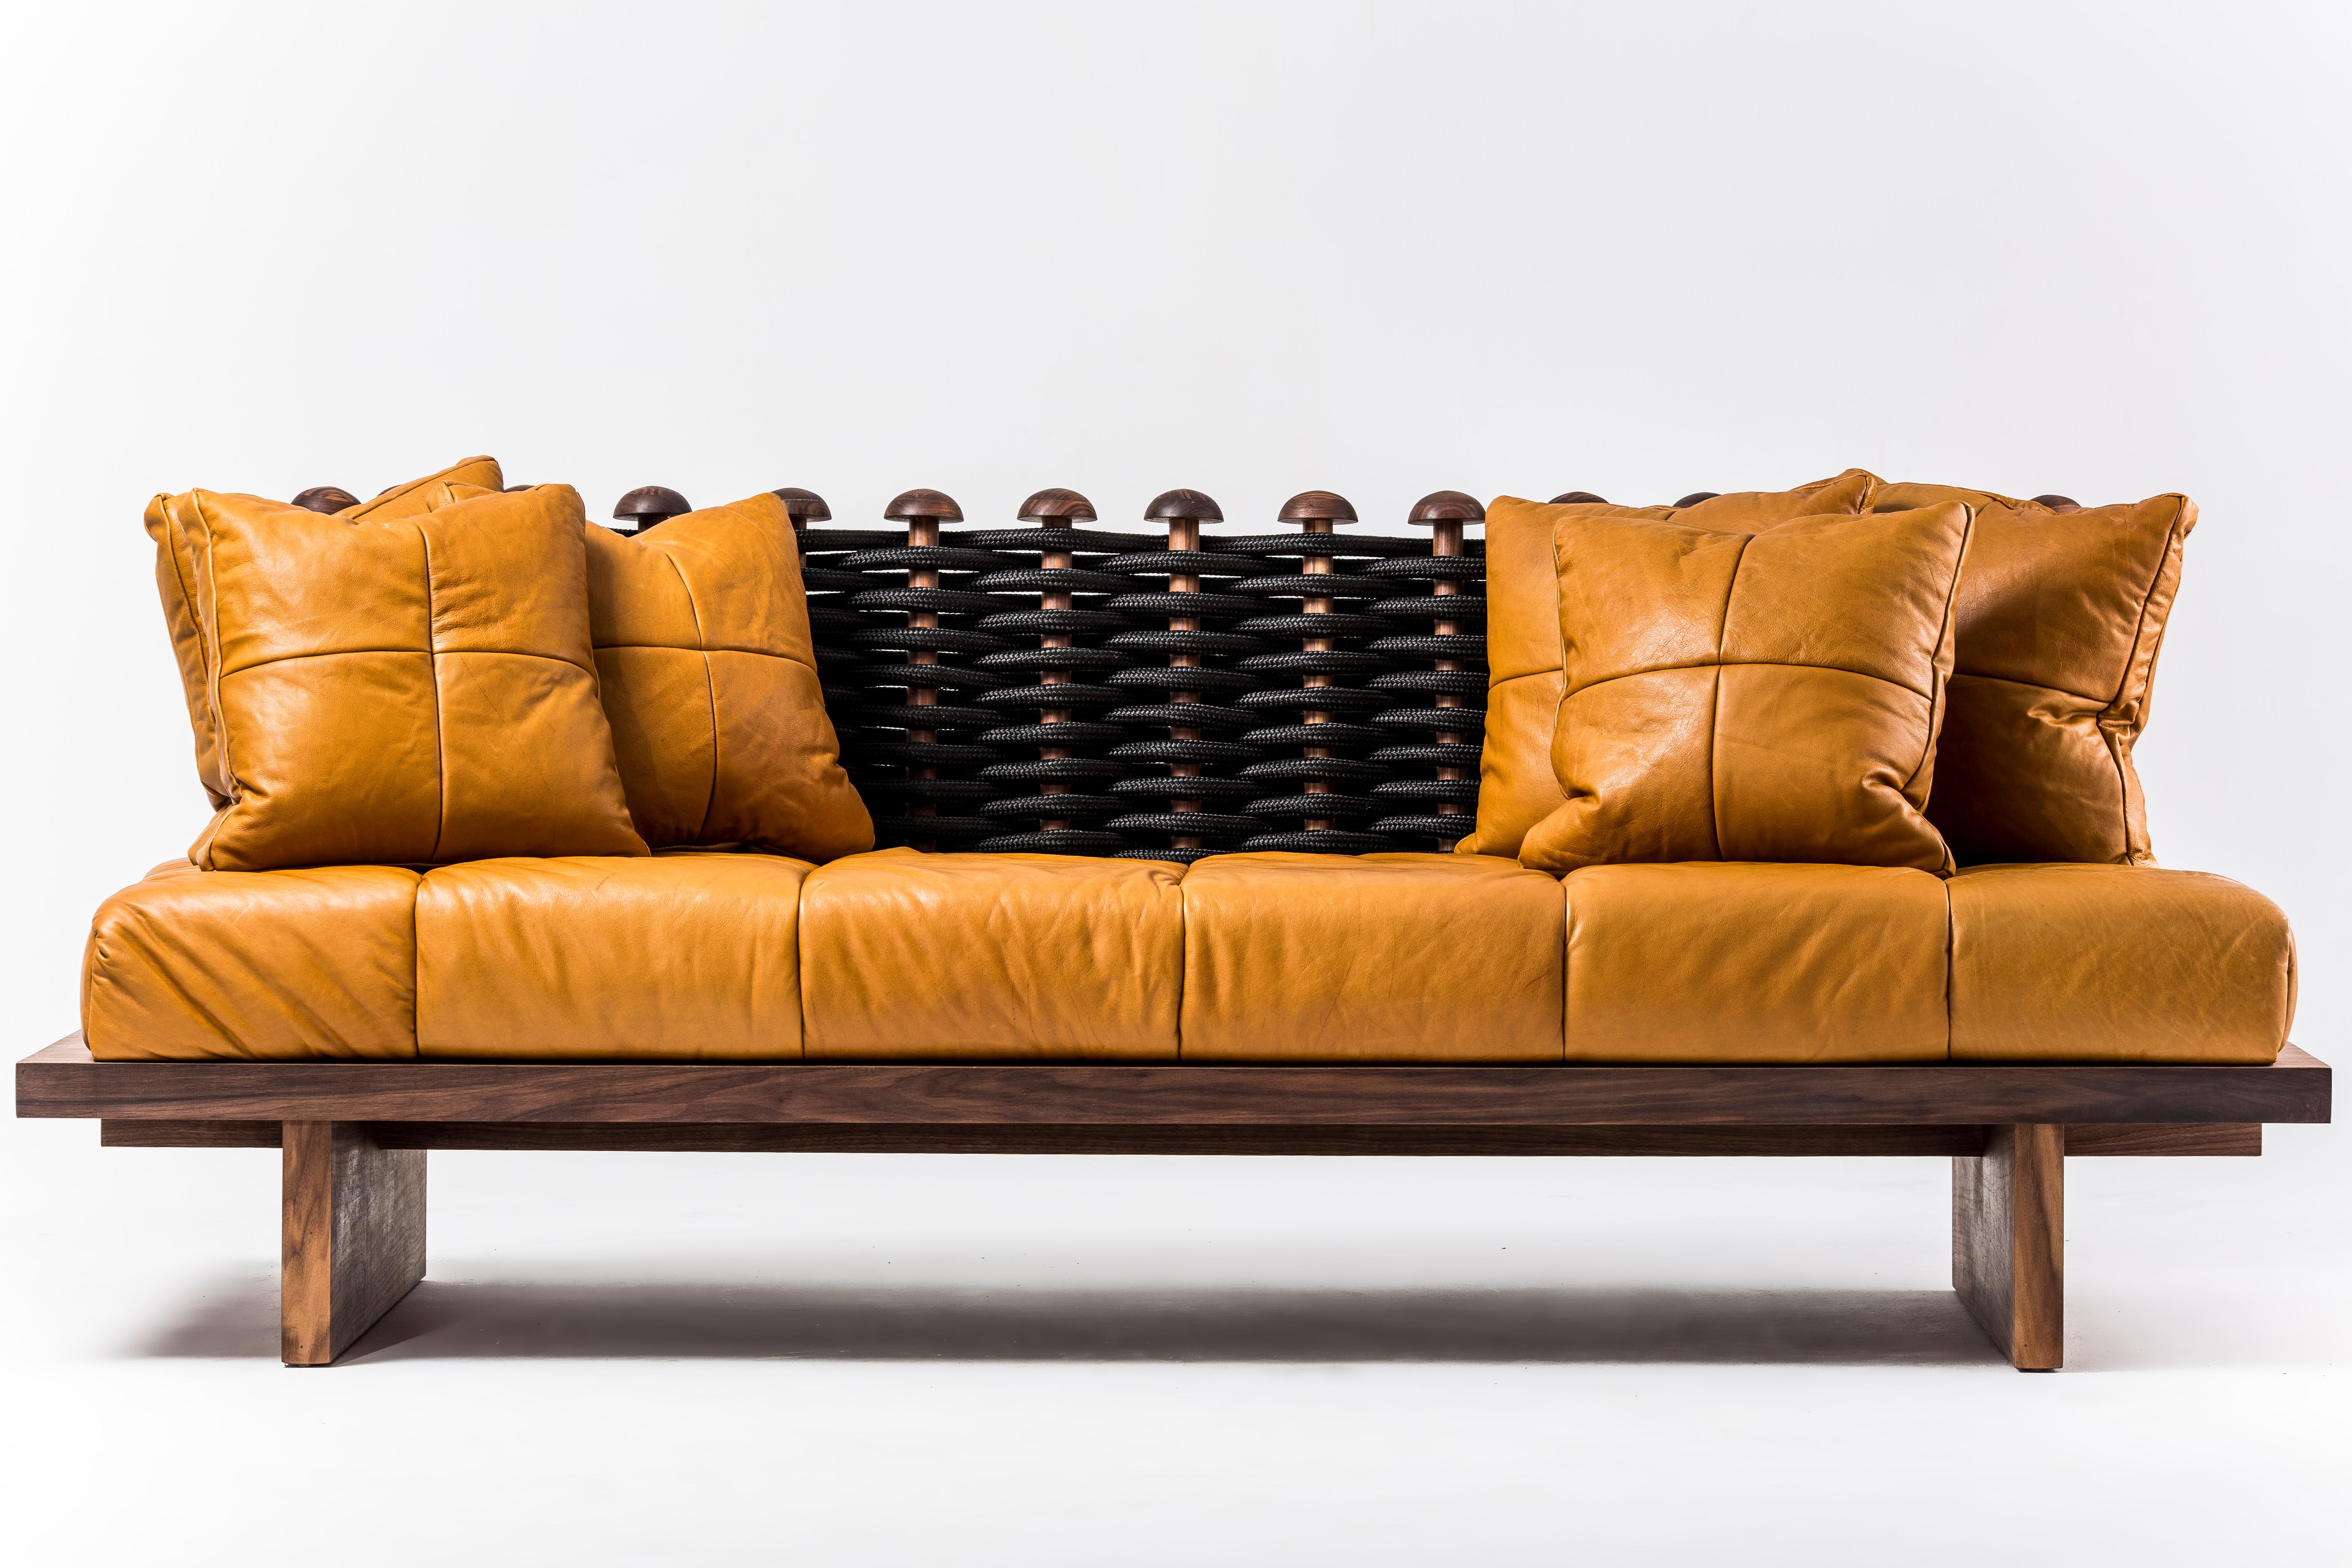 Shaker sofa by Egg Designs
Dimensions: 110 L X 240 D X 92.3 H cm
Materials: walnut timbe, nylon rope, leather upholstry

Founded by South Africans and life partners, Greg and Roche Dry - Egg is a unique perspective in contemporary furniture